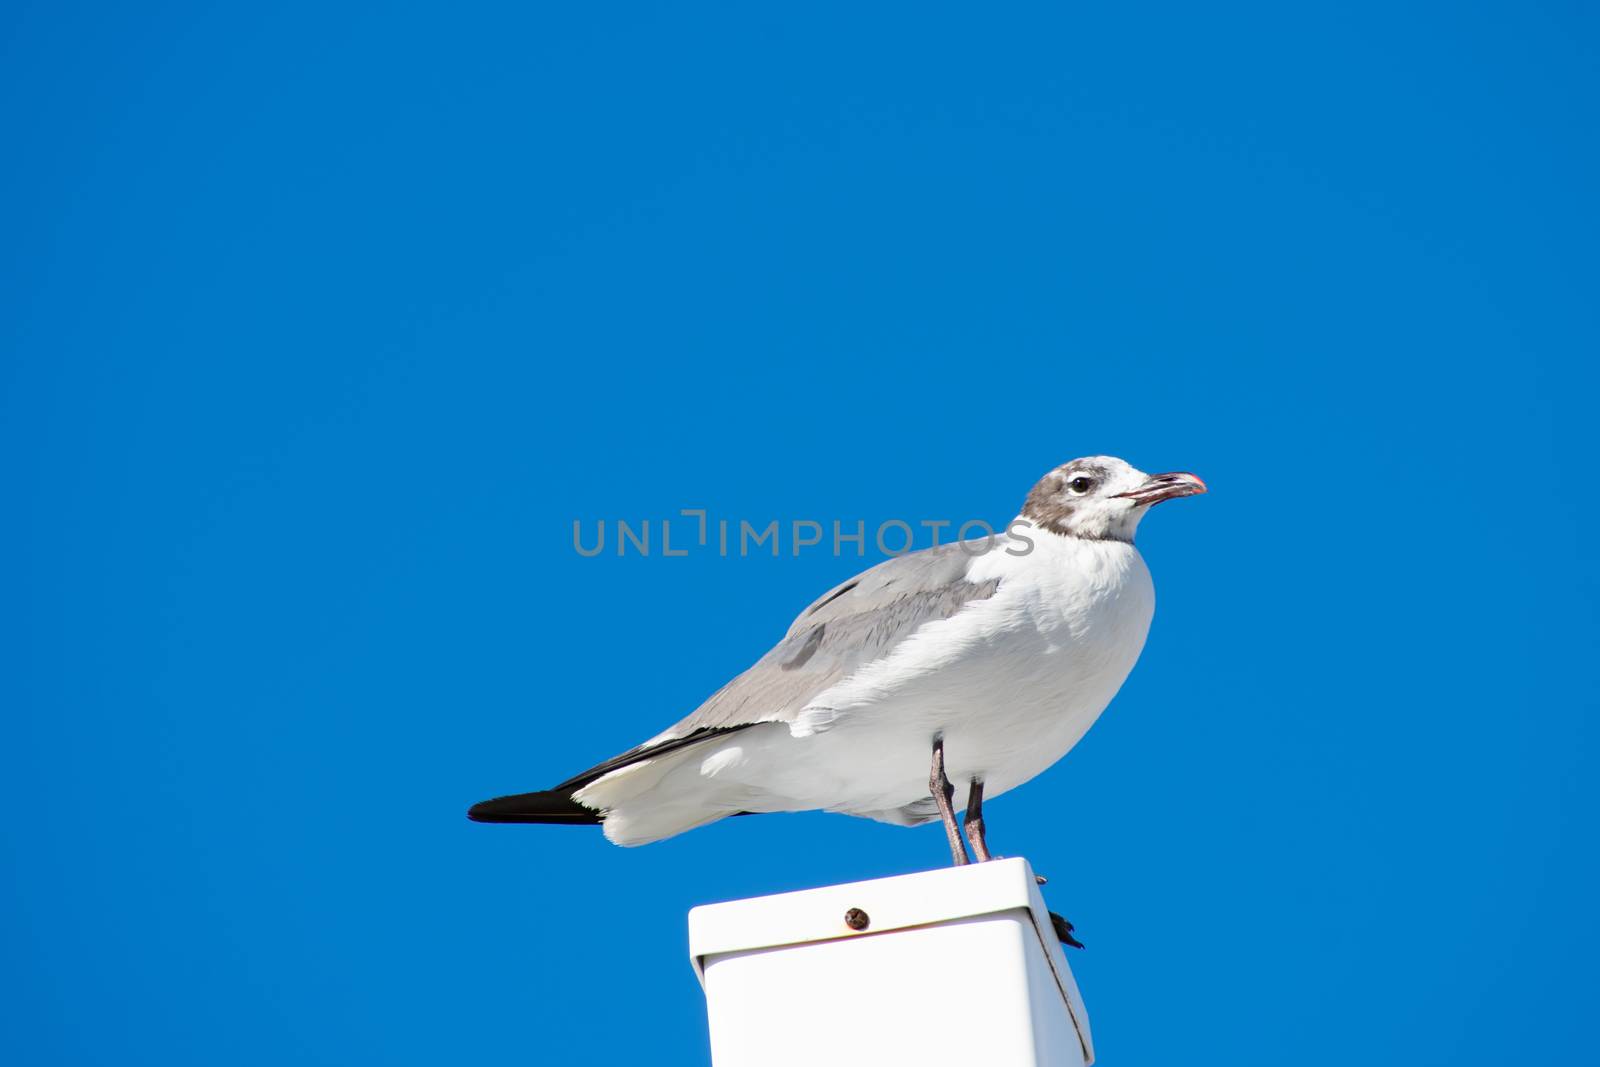 A Seagull Standing on a White Post With a Solid Blue Background by bju12290